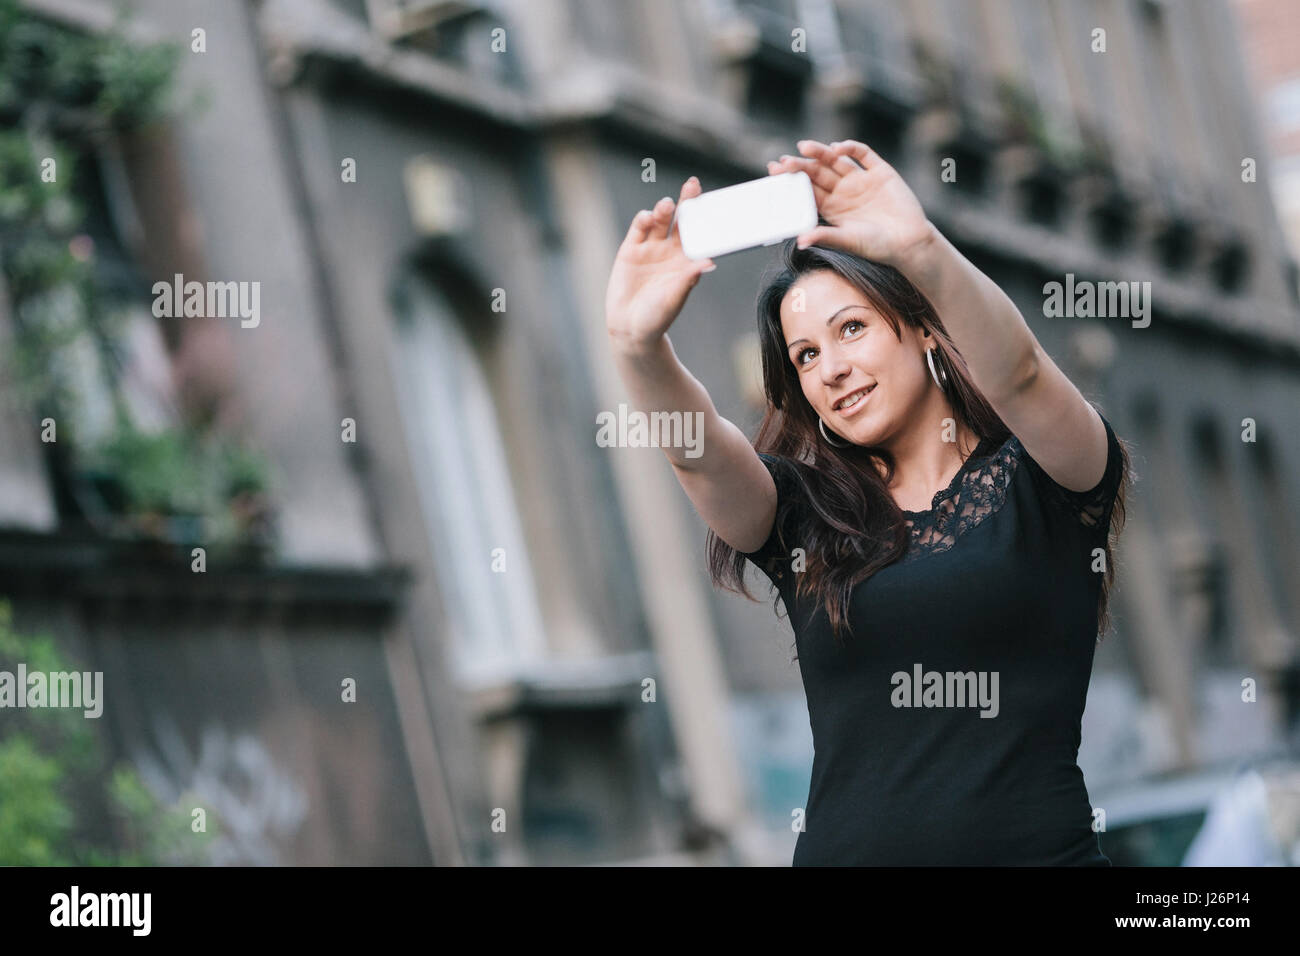 Happy beautiful young woman taking a selfie with her smart phone. Stock Photo